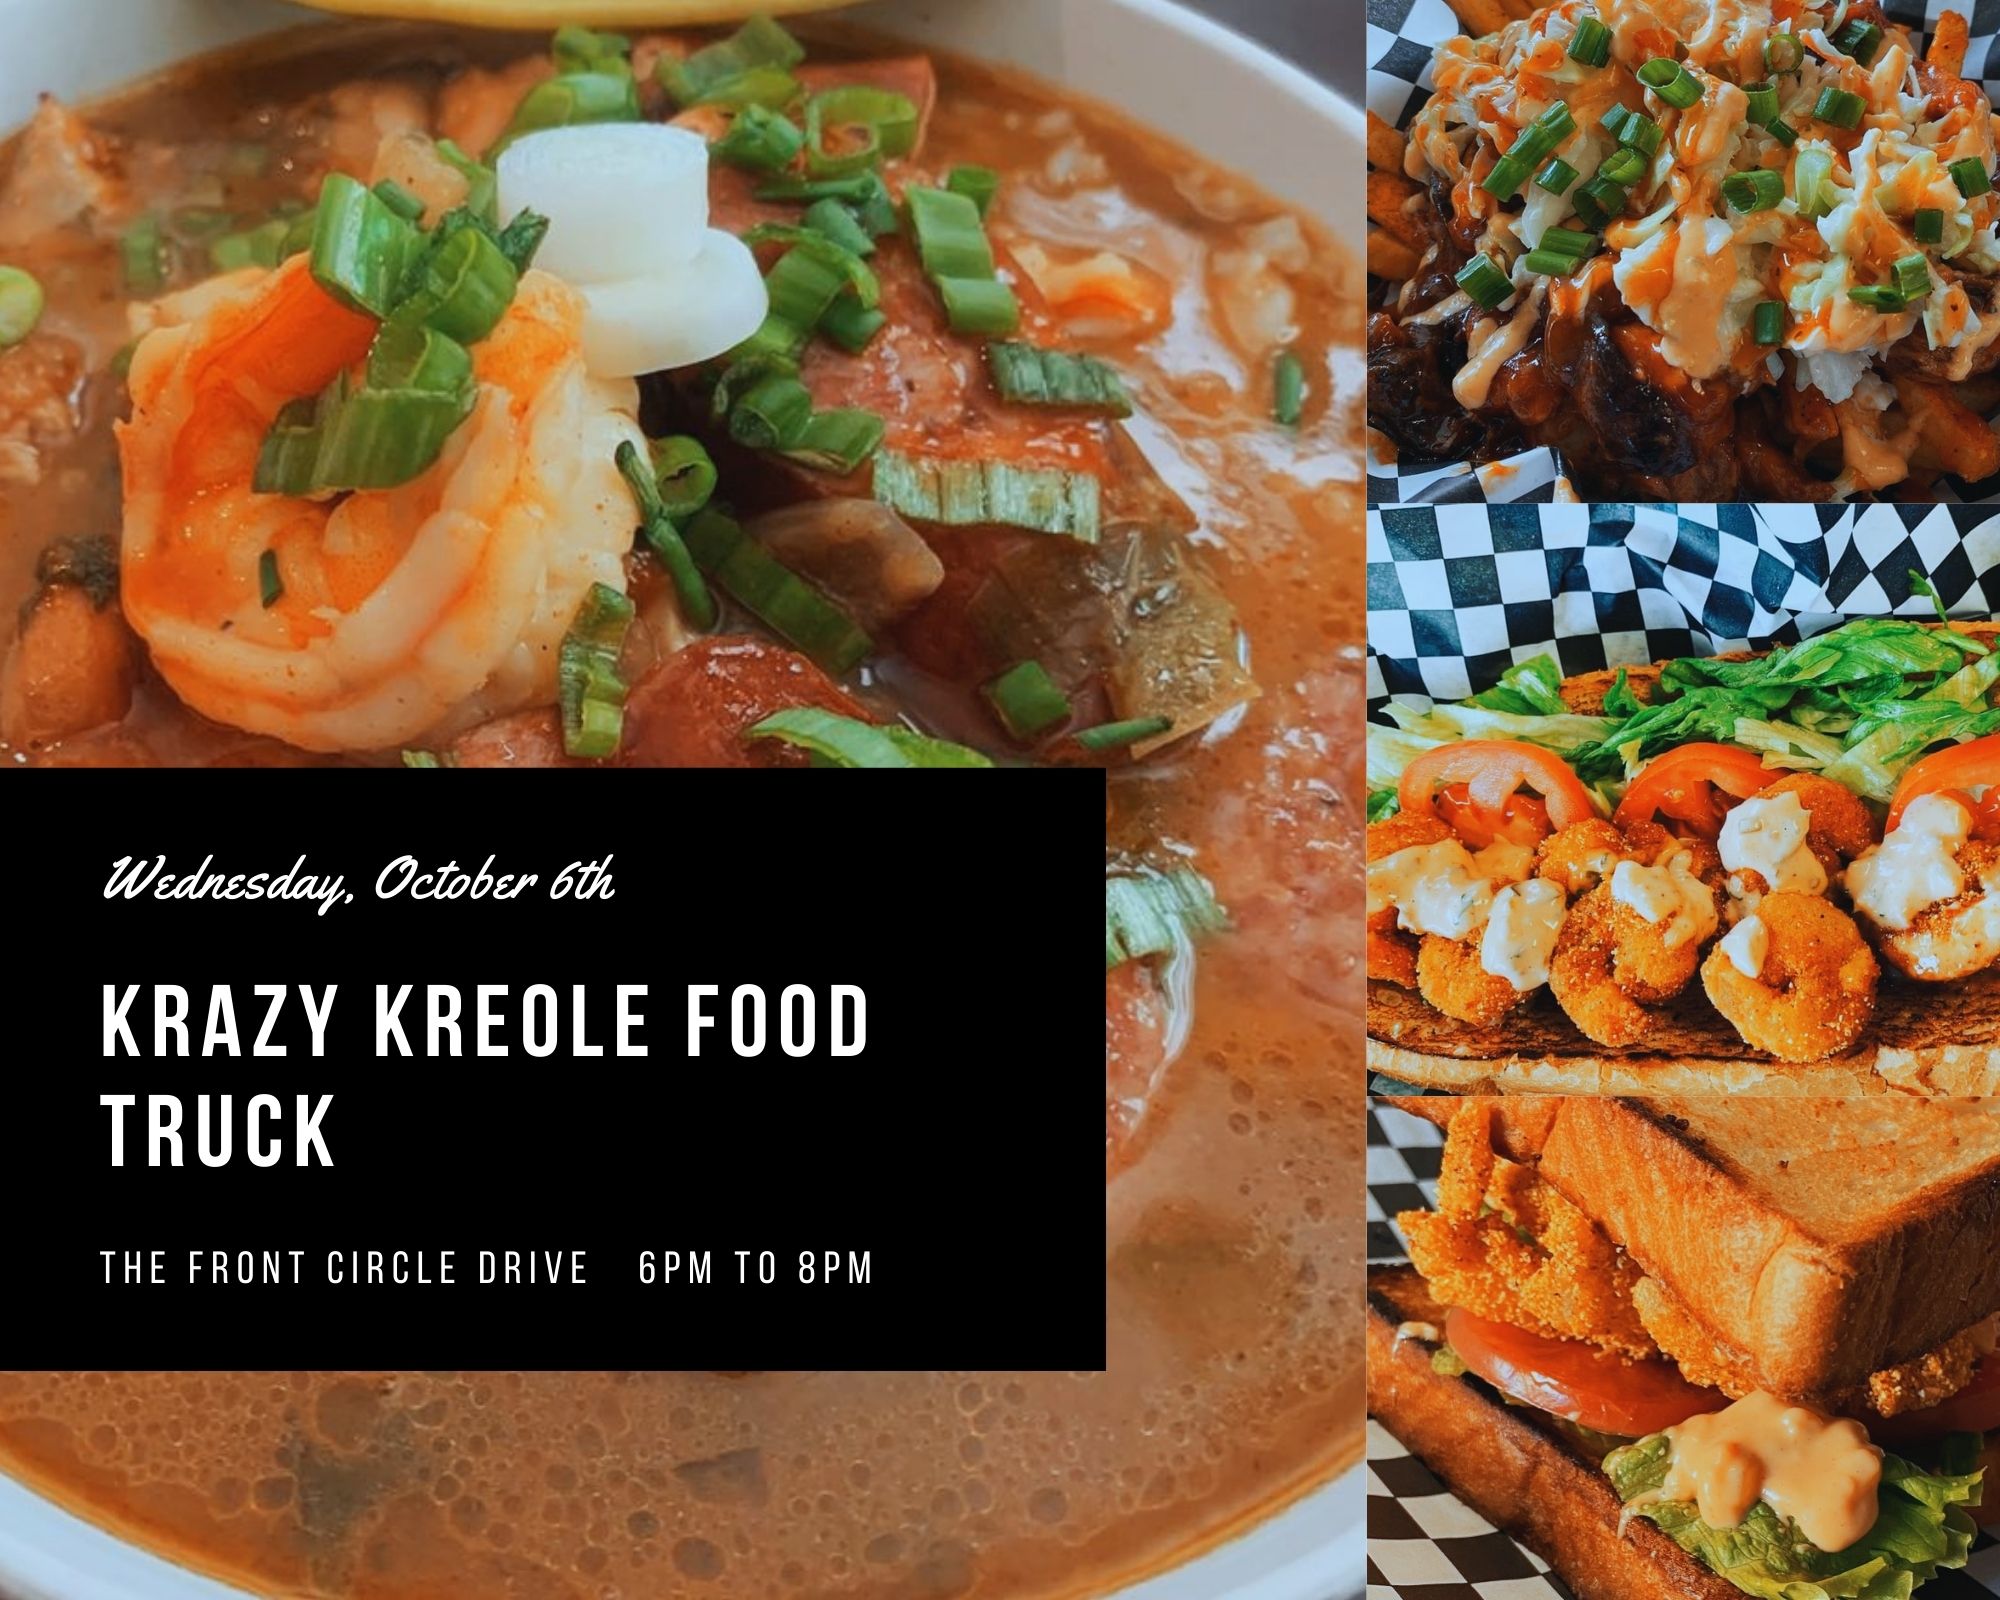 Crazy krumble food truck serving delicious bites near apartments in The Woodlands TX.